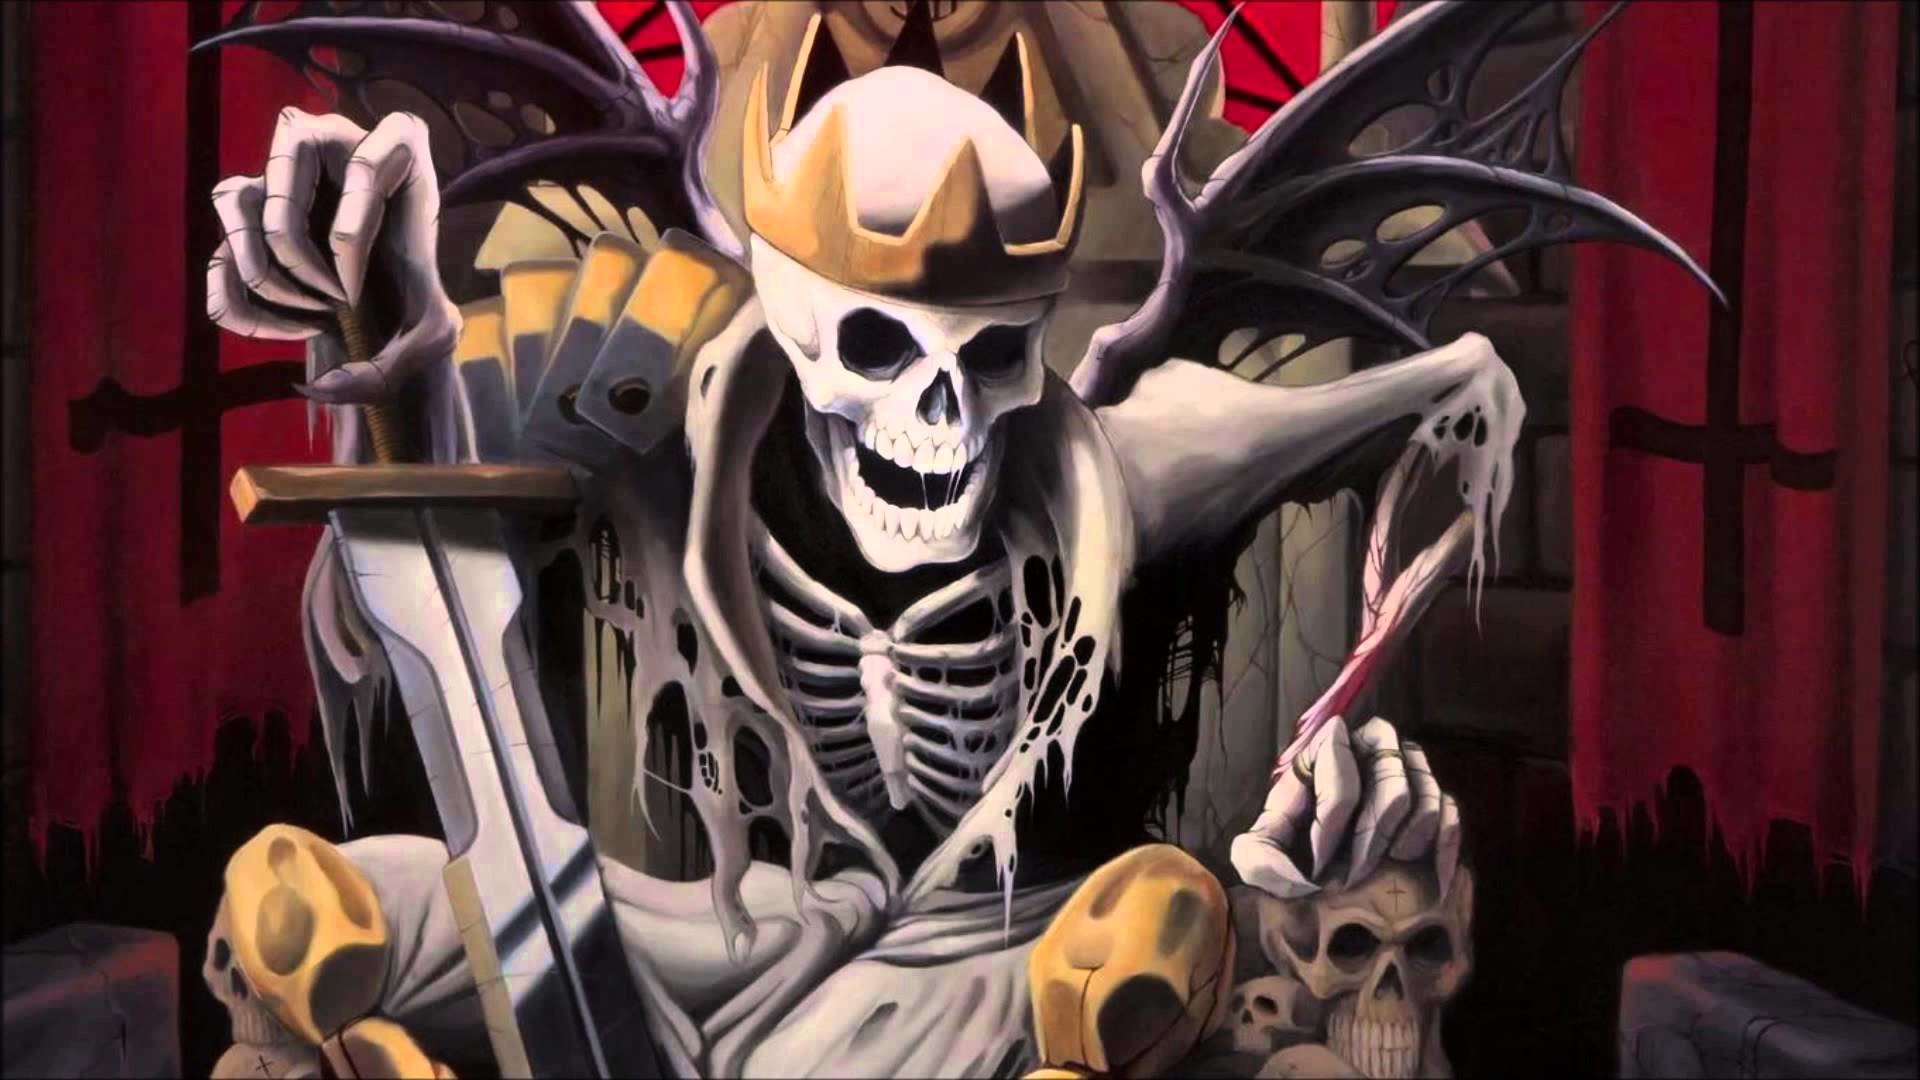 1920x1080 Avenged Sevenfold - "Hail To The King" Song Preview [NEW]